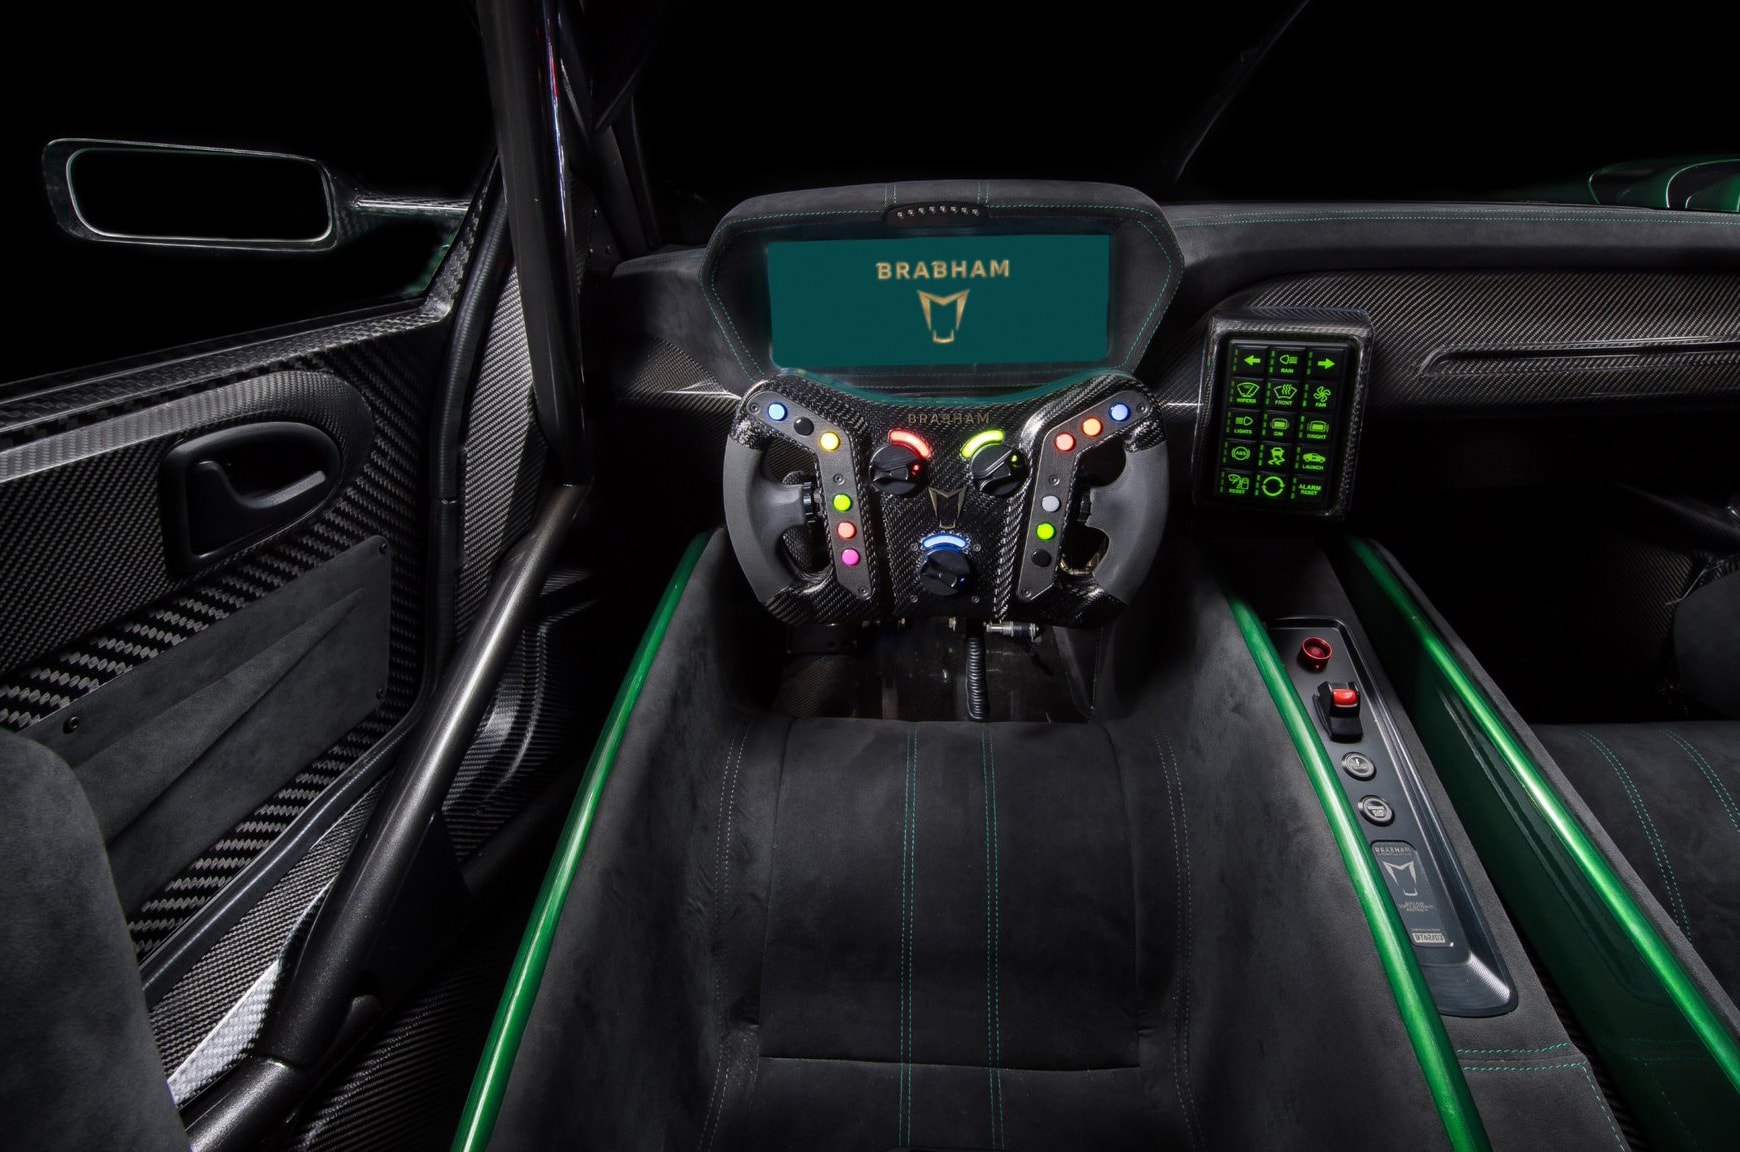 Everything you need to know about the new 700bhp Brabham supercar